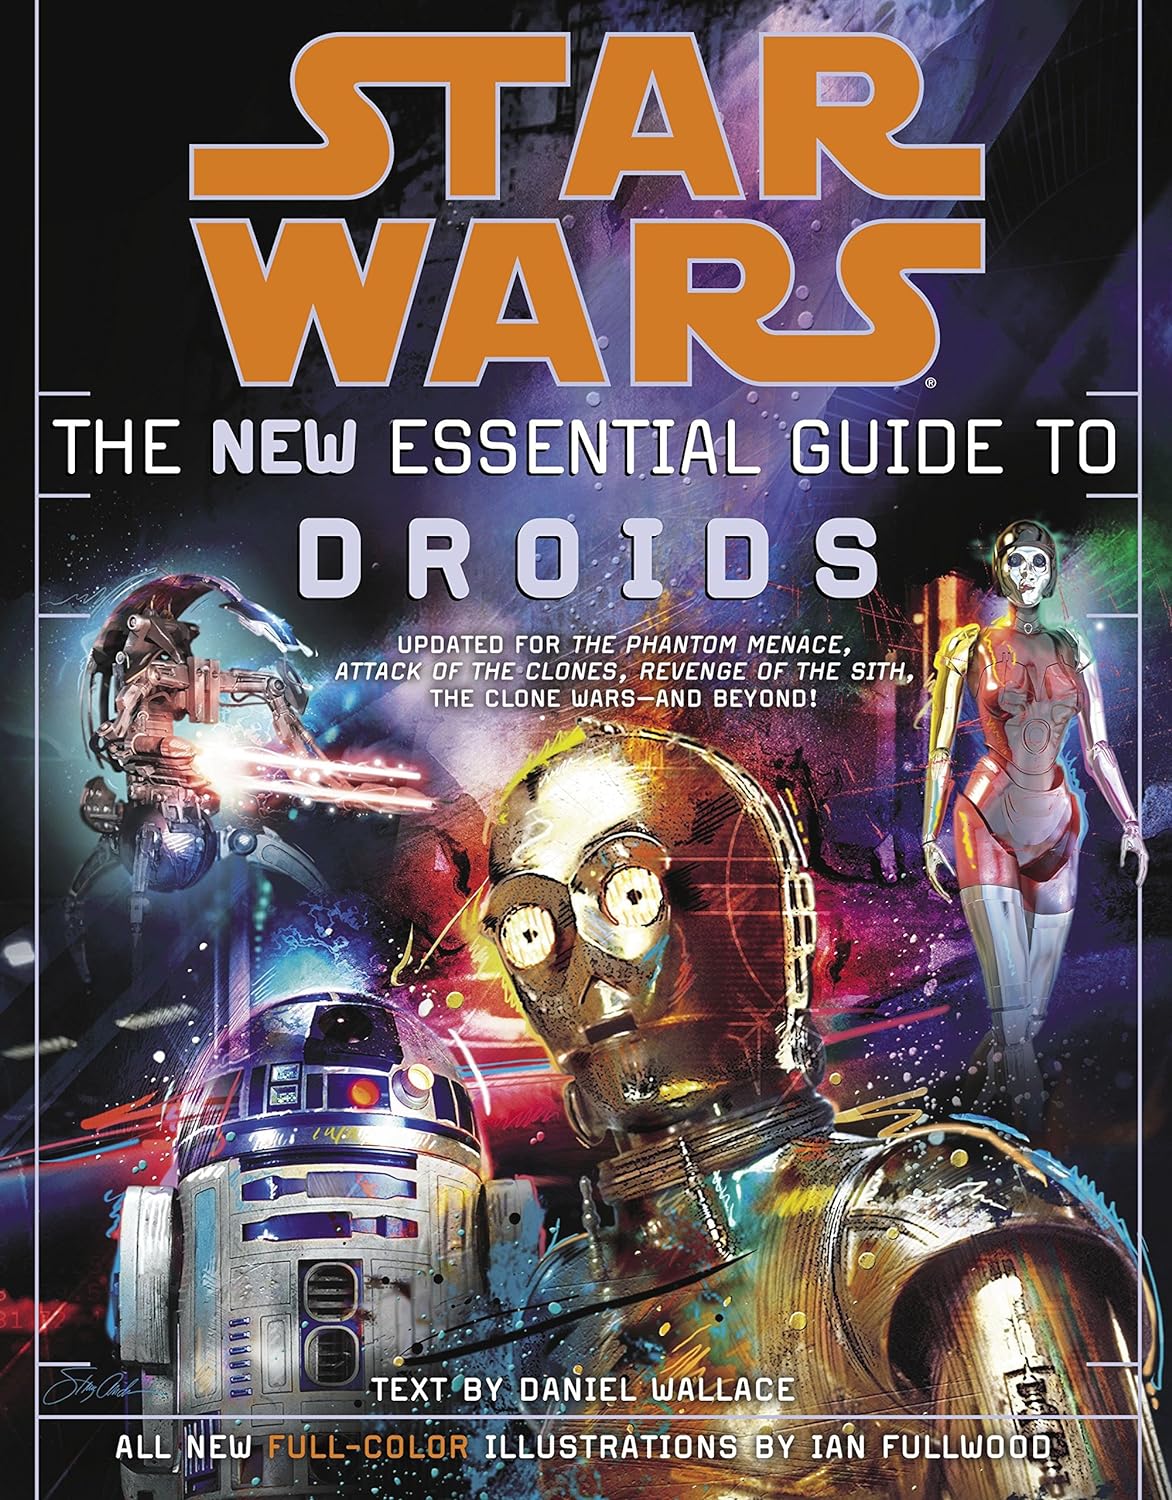 The New Essential Guide to Droids (Star Wars)